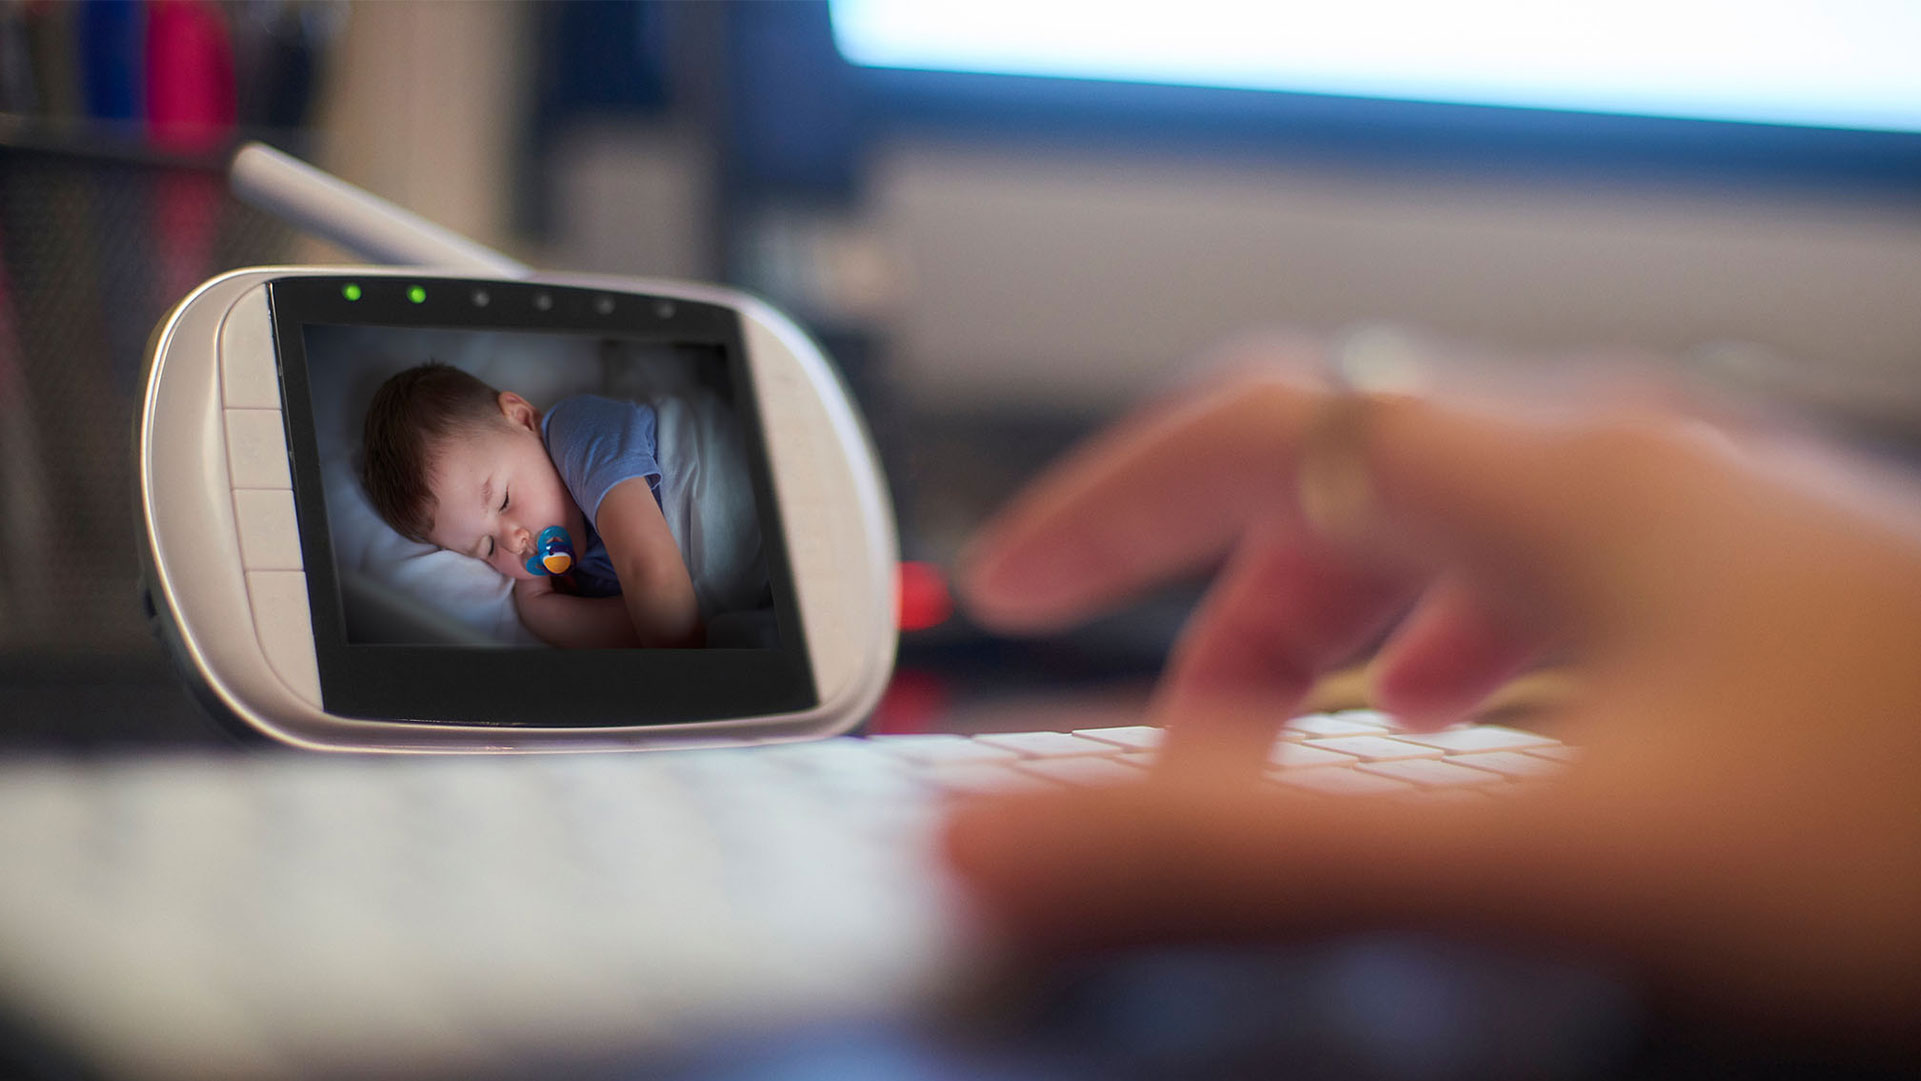 What baby monitors cannot be hacked